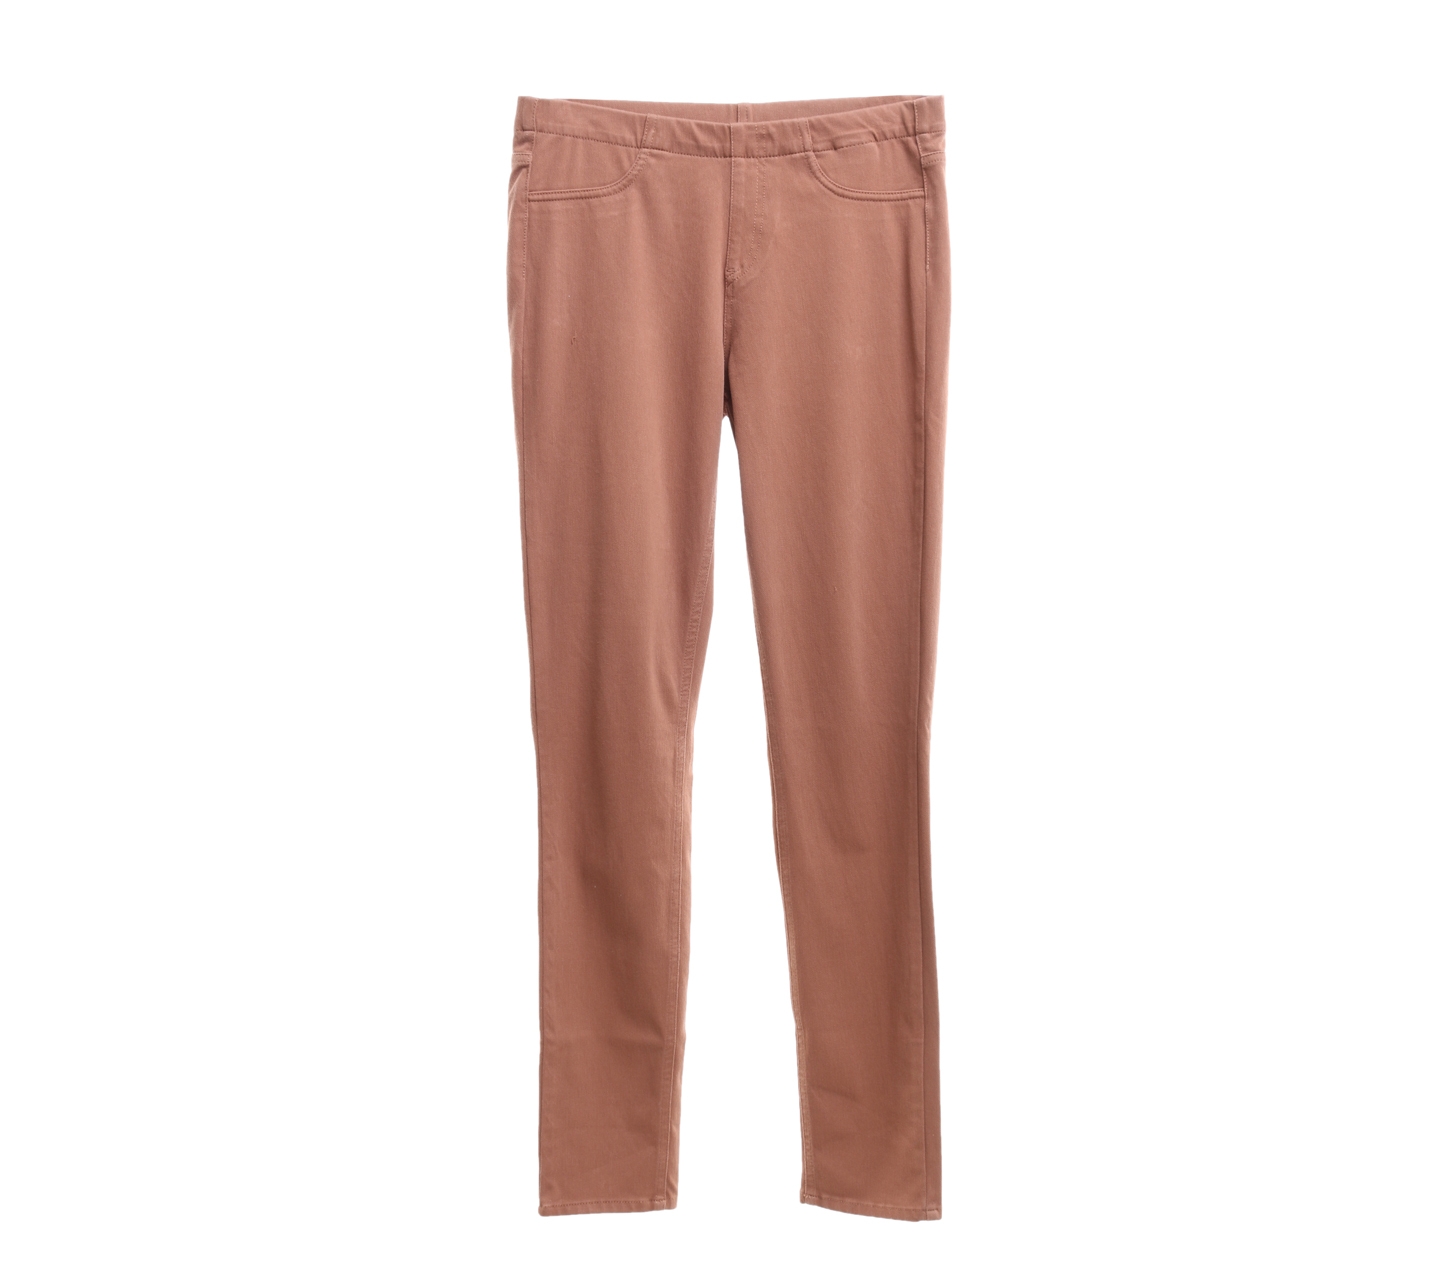 Uniqlo Brown Jegging Long Pants